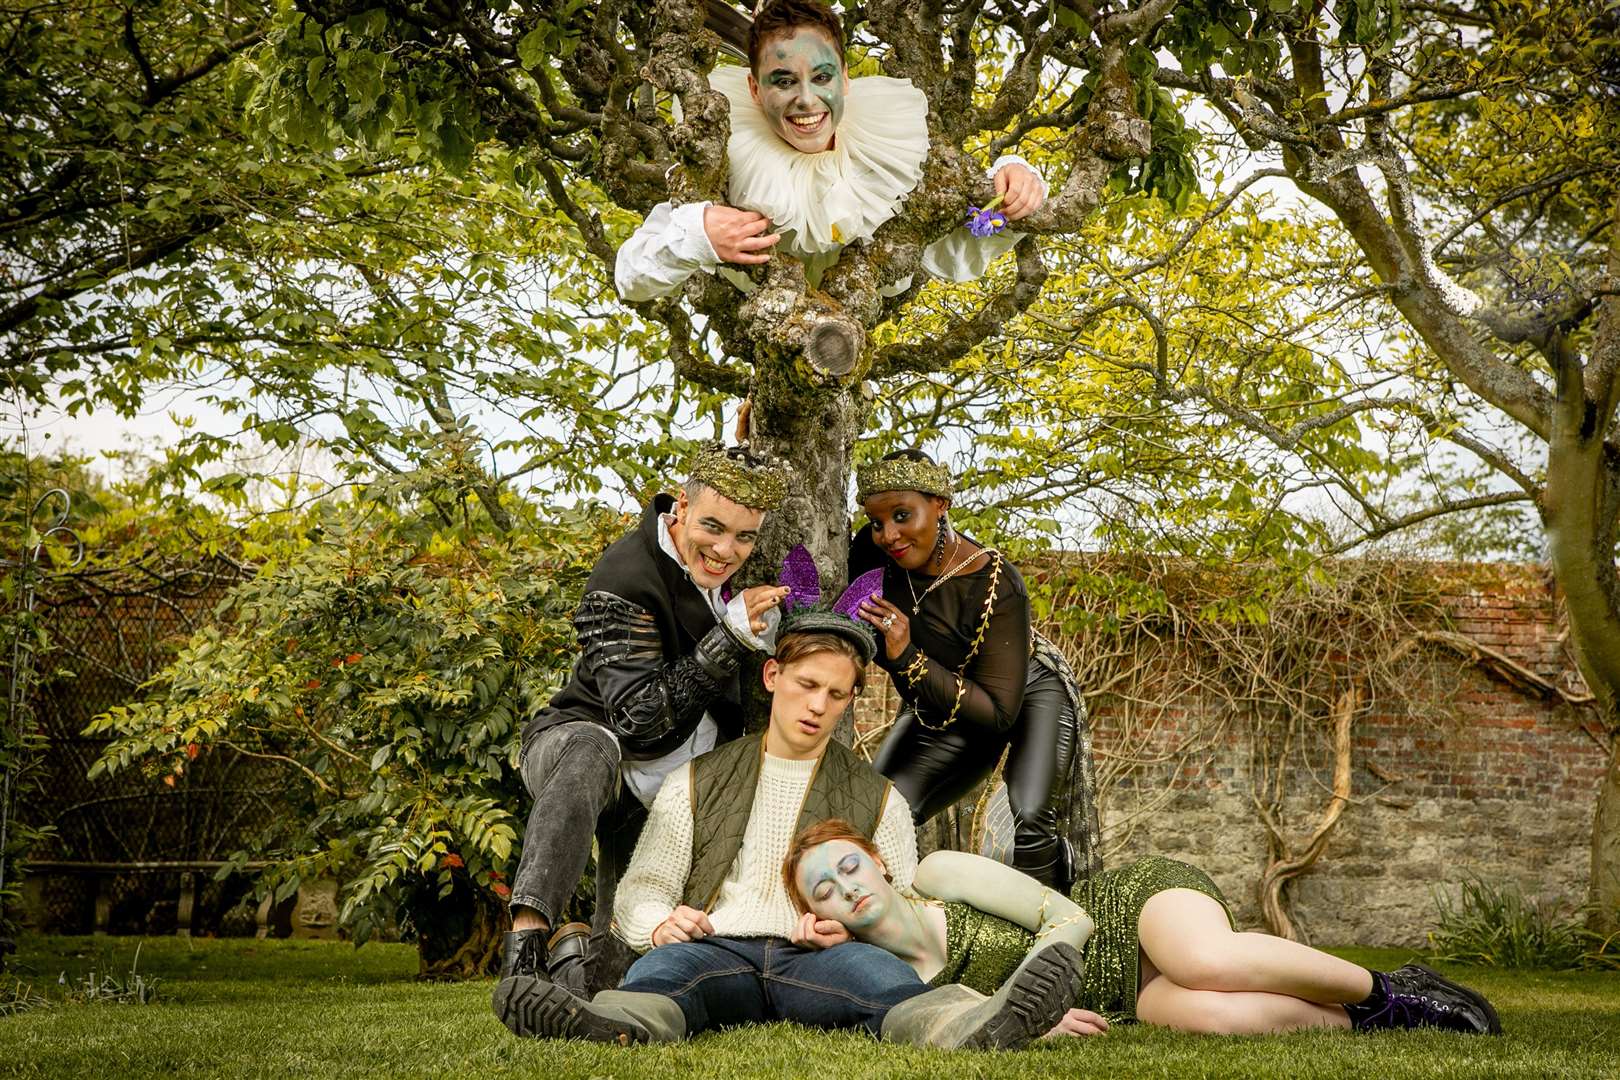 The Changeling Theatre cast last year in A Midsummer Night's Dream Picture: Changeling Theatre